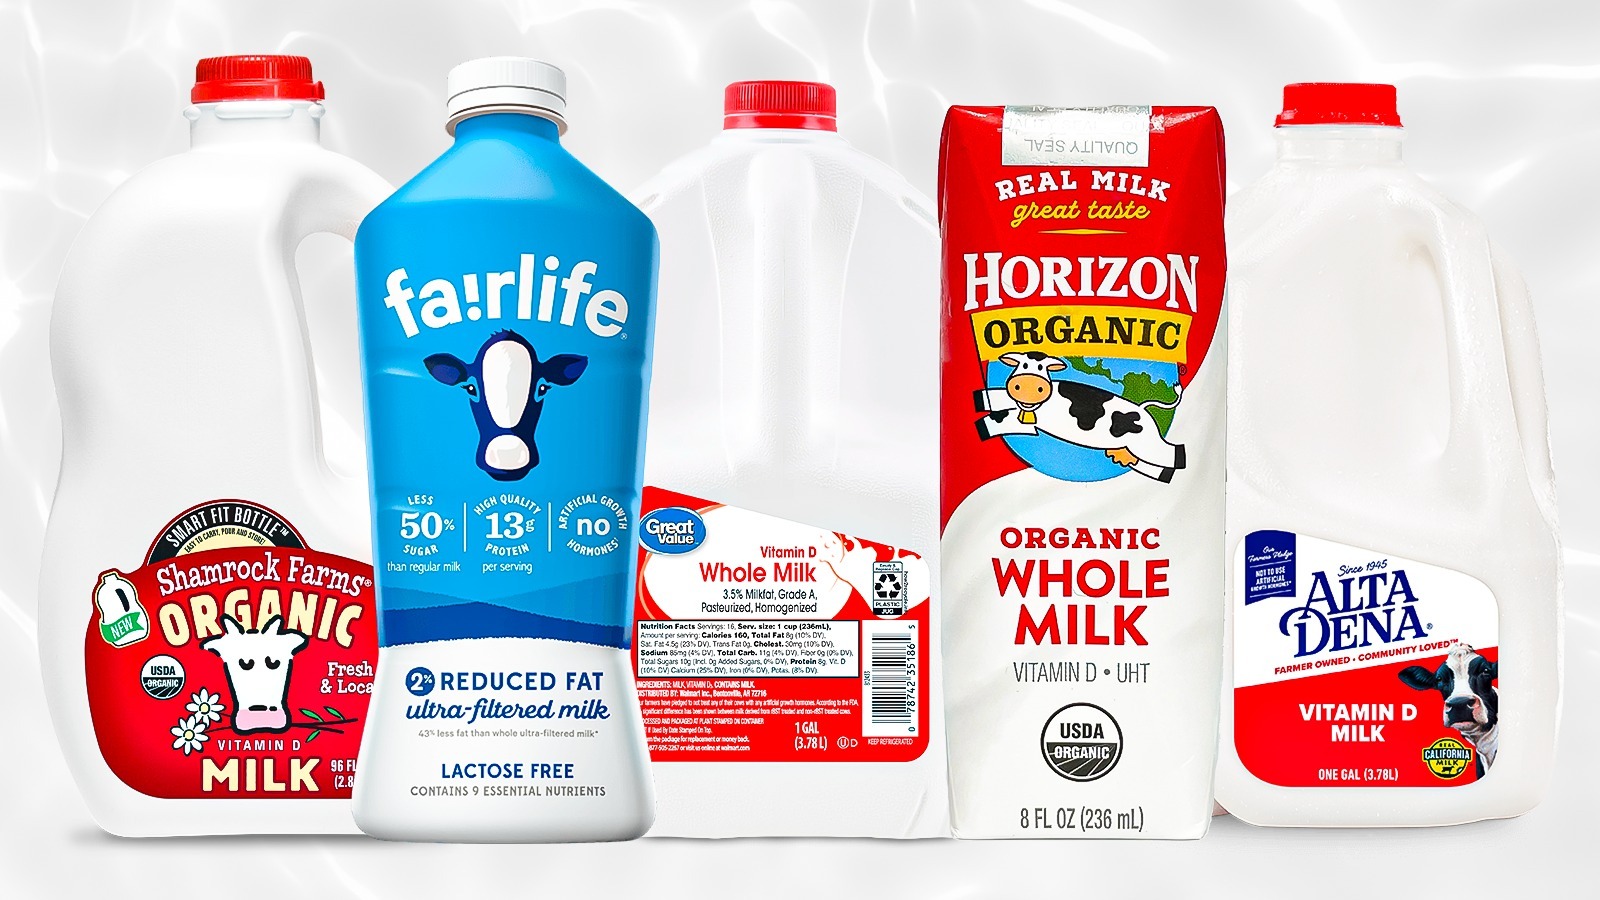 fairlife Launches Improved Whole Milk Line For Kids